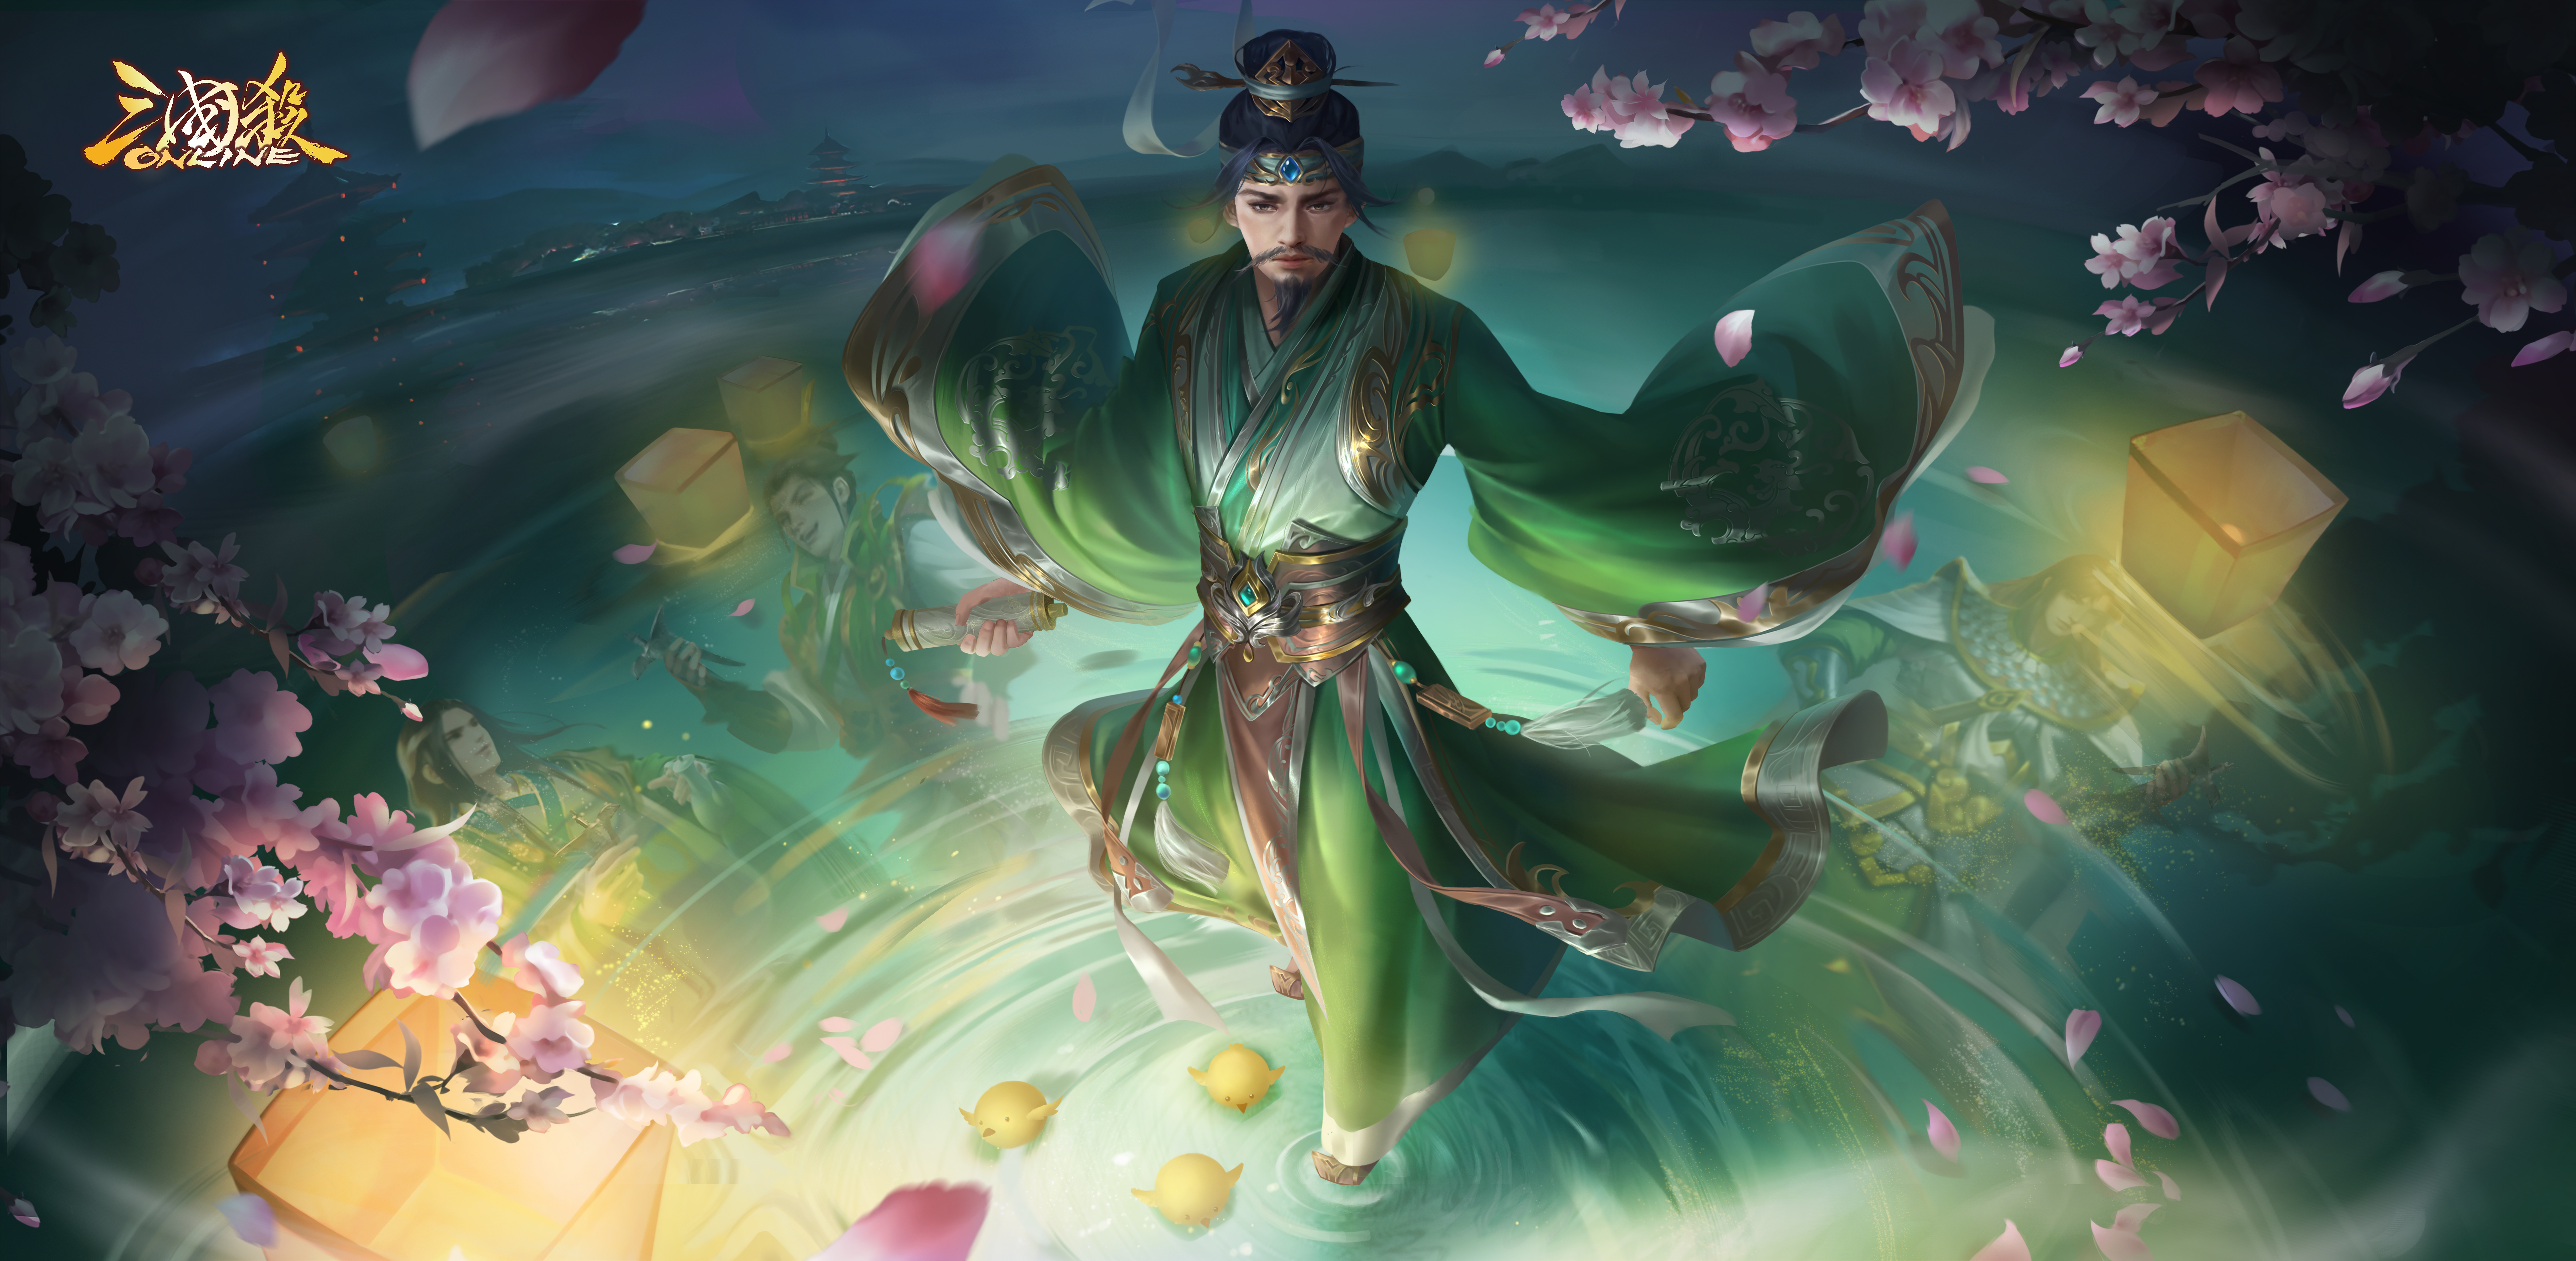 General 9000x4404 video game characters Three Kingdoms video games video game art video game men water standing in water petals flowers lights